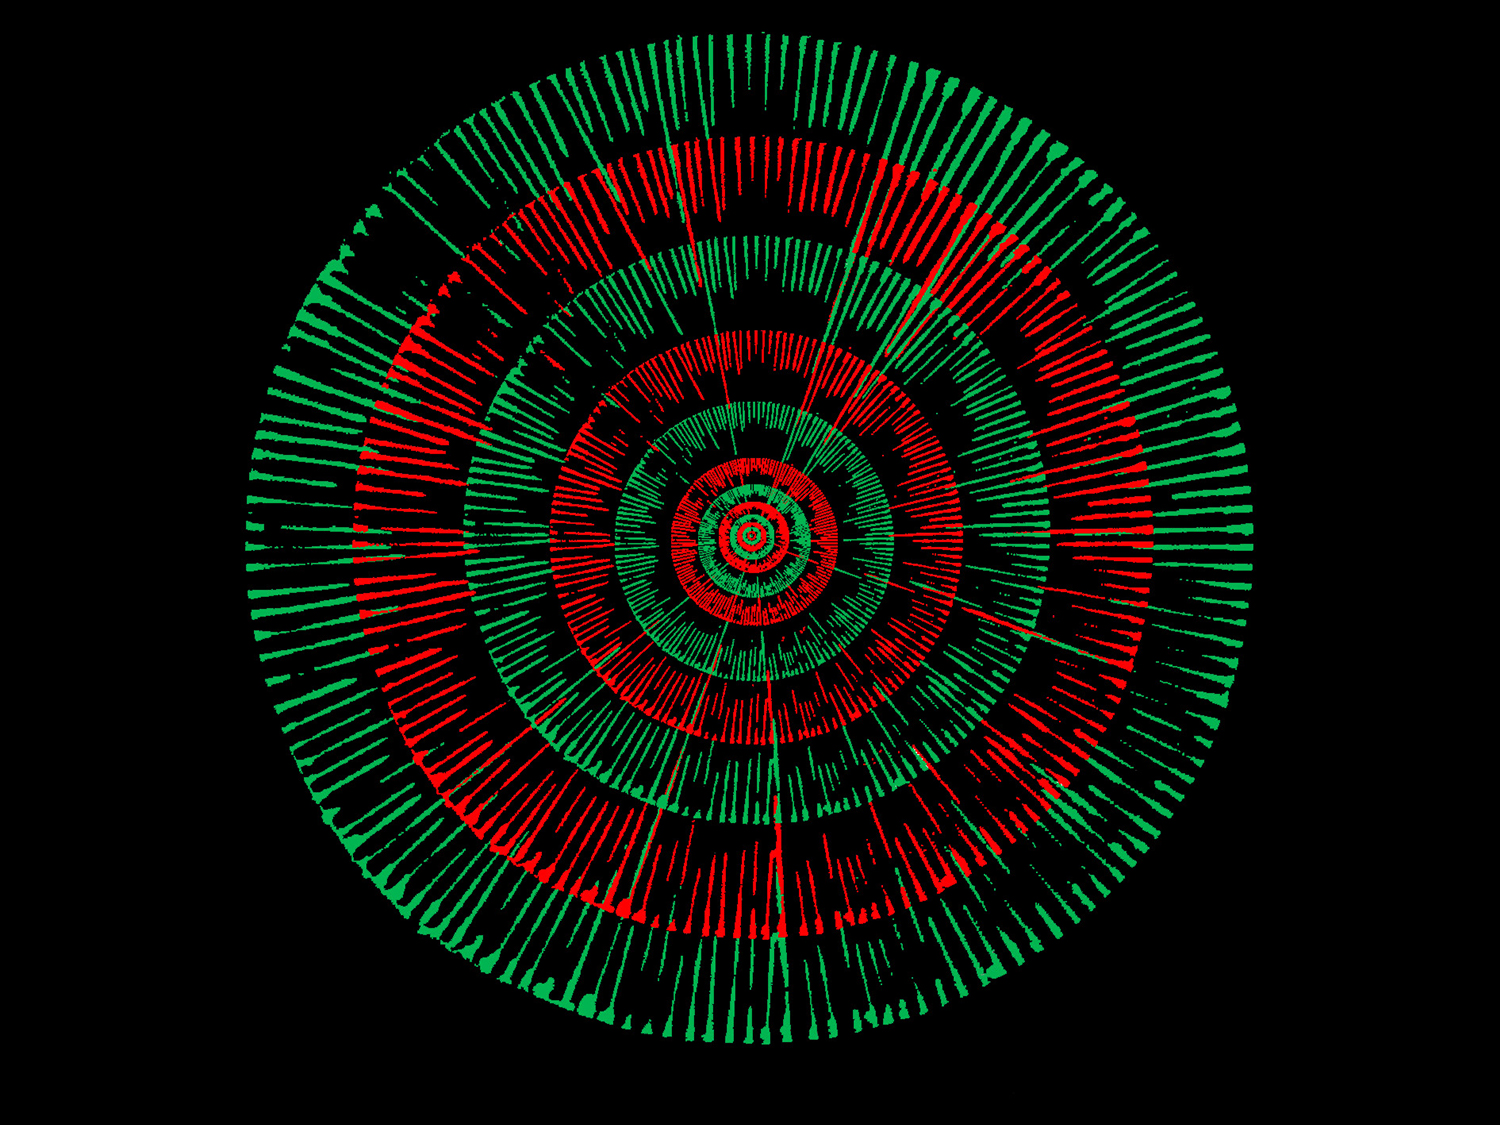 Painting on a black background. Concentric circles of short lines, alternating green then red then green